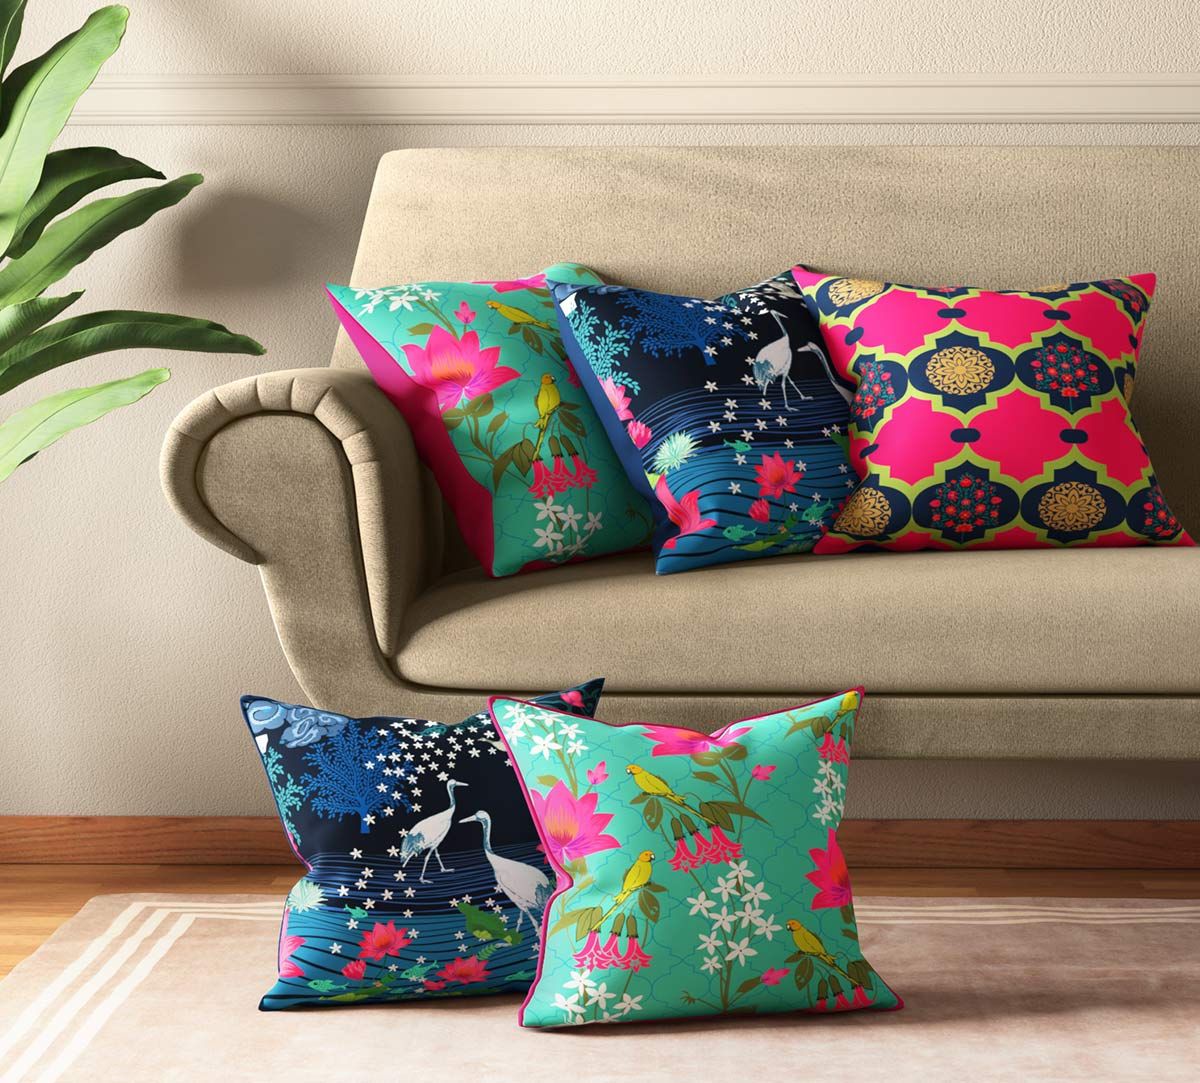 Blooms & Swans Cushion Cover Set of 5